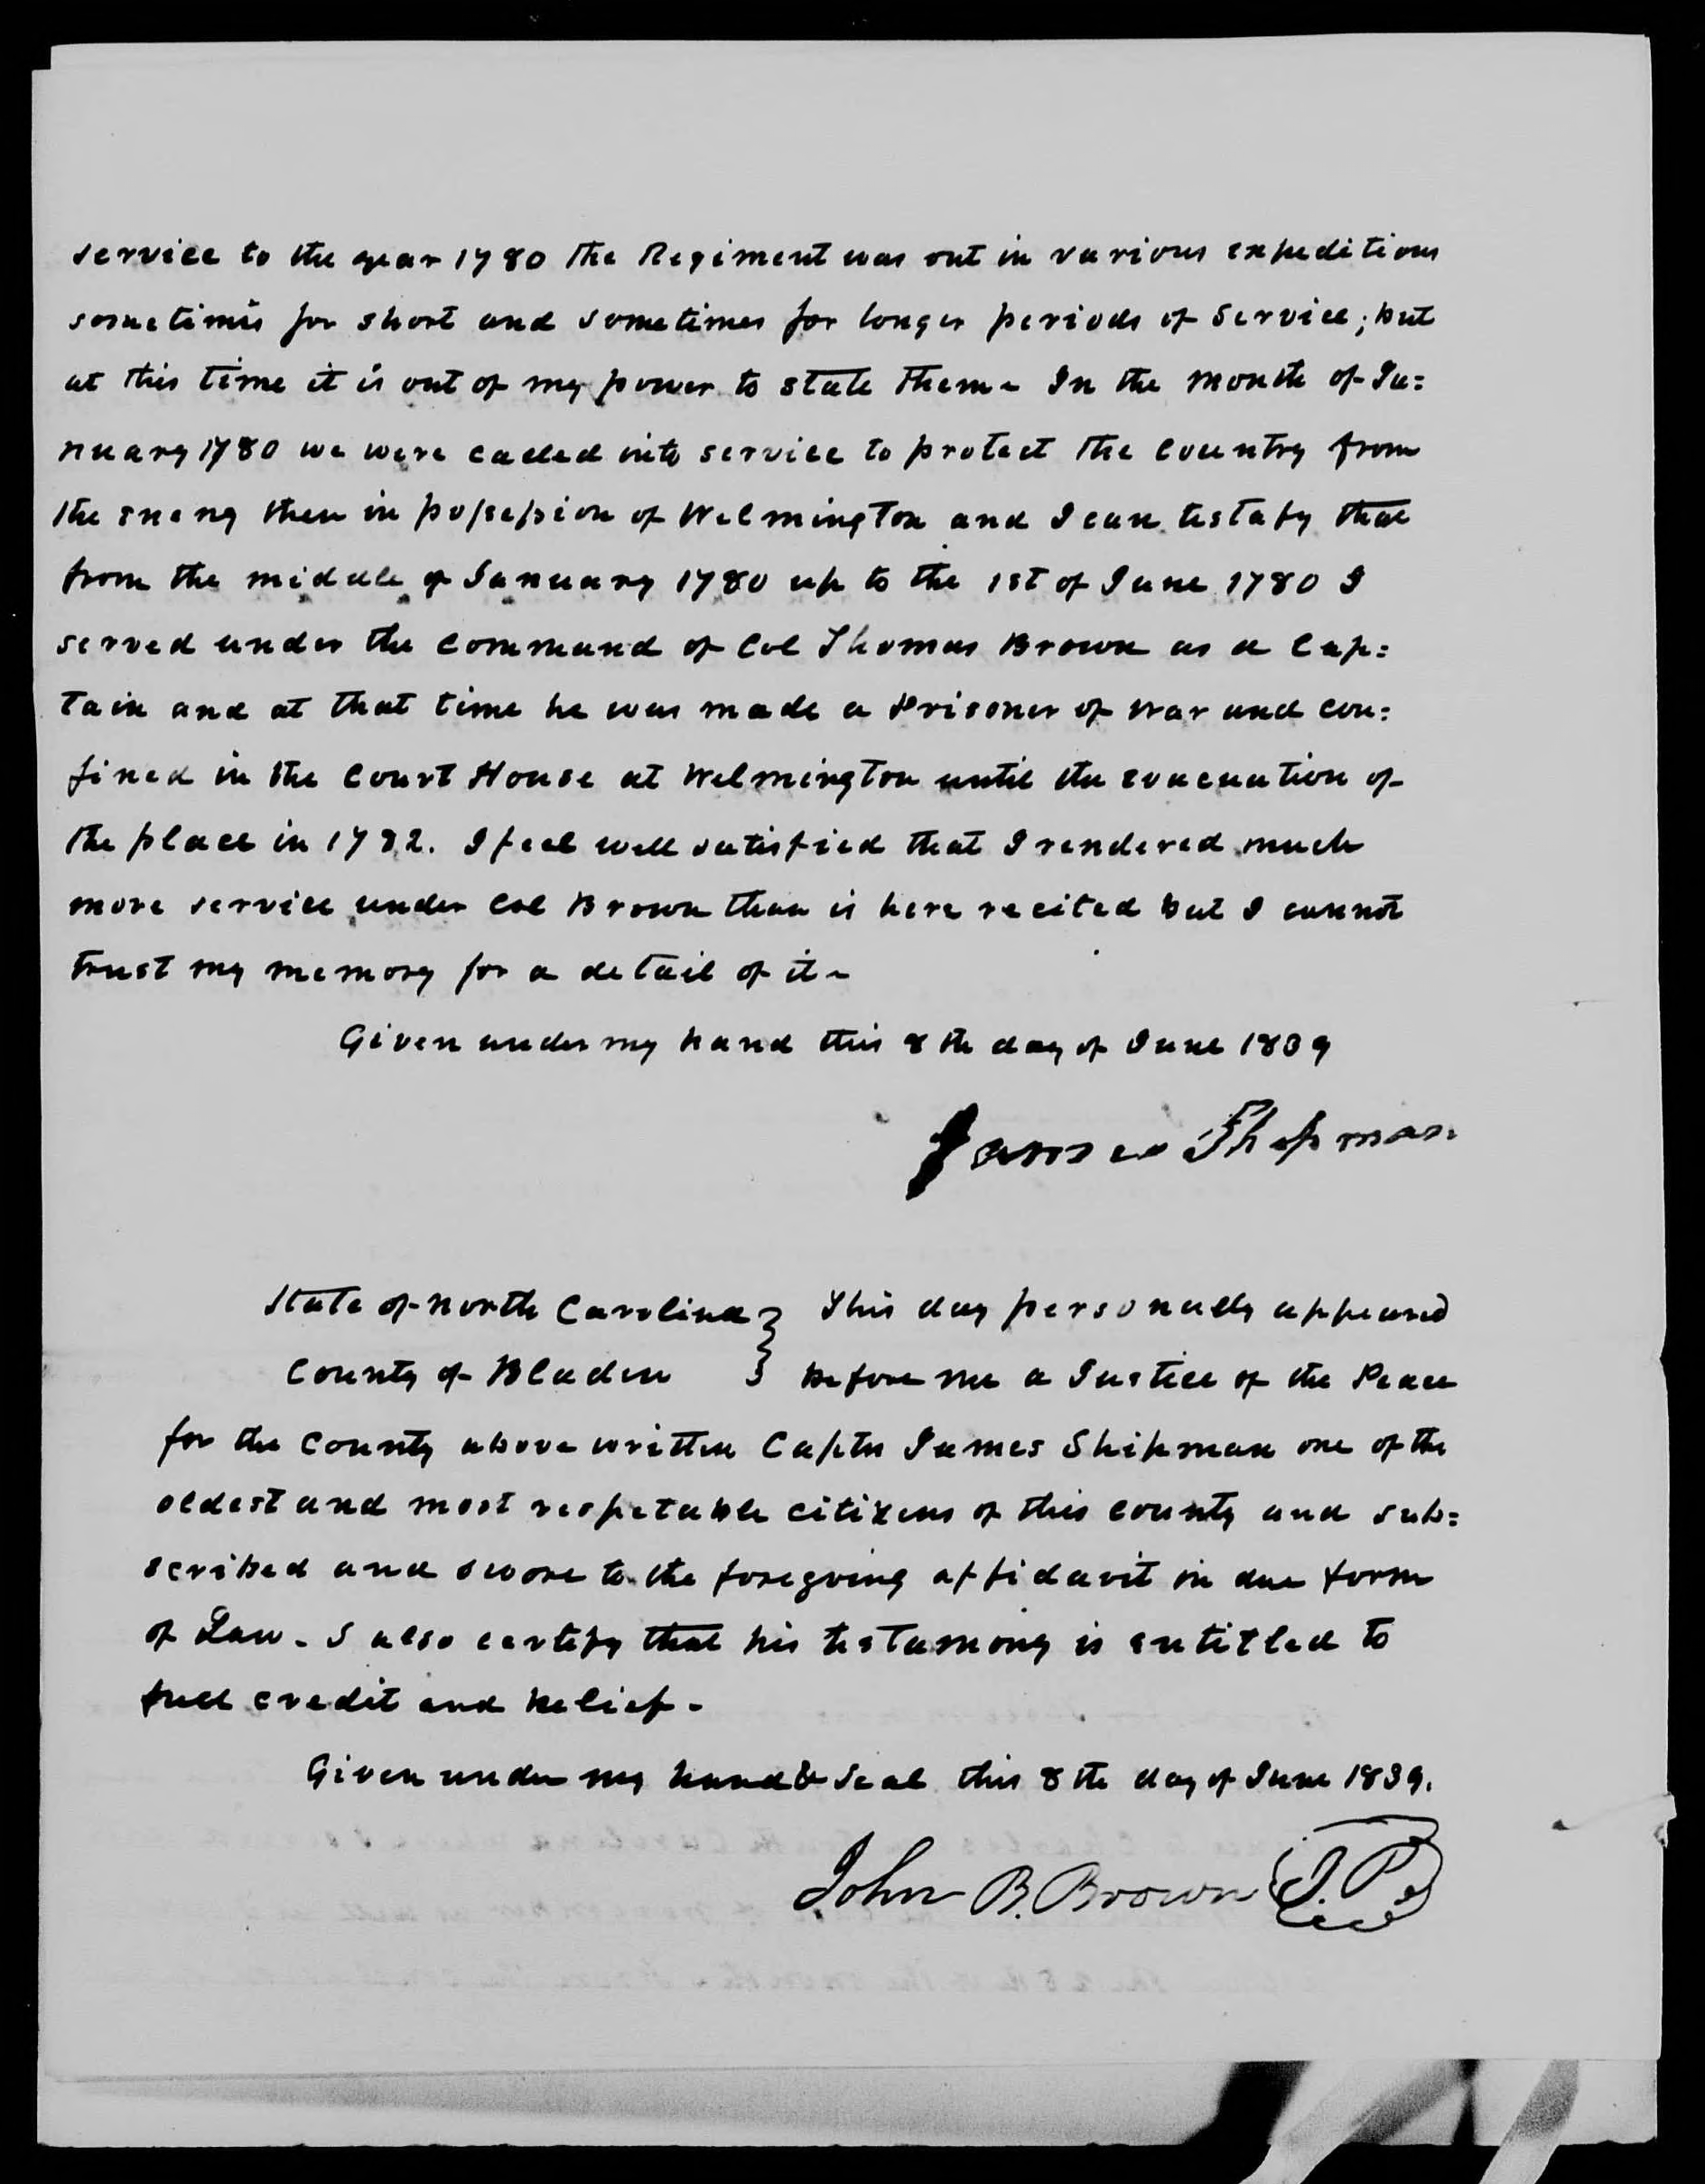 Affidavit of James Shipman (amended) in support of a Pension Claim for Lucy Brown, 8 June 1839, page 2